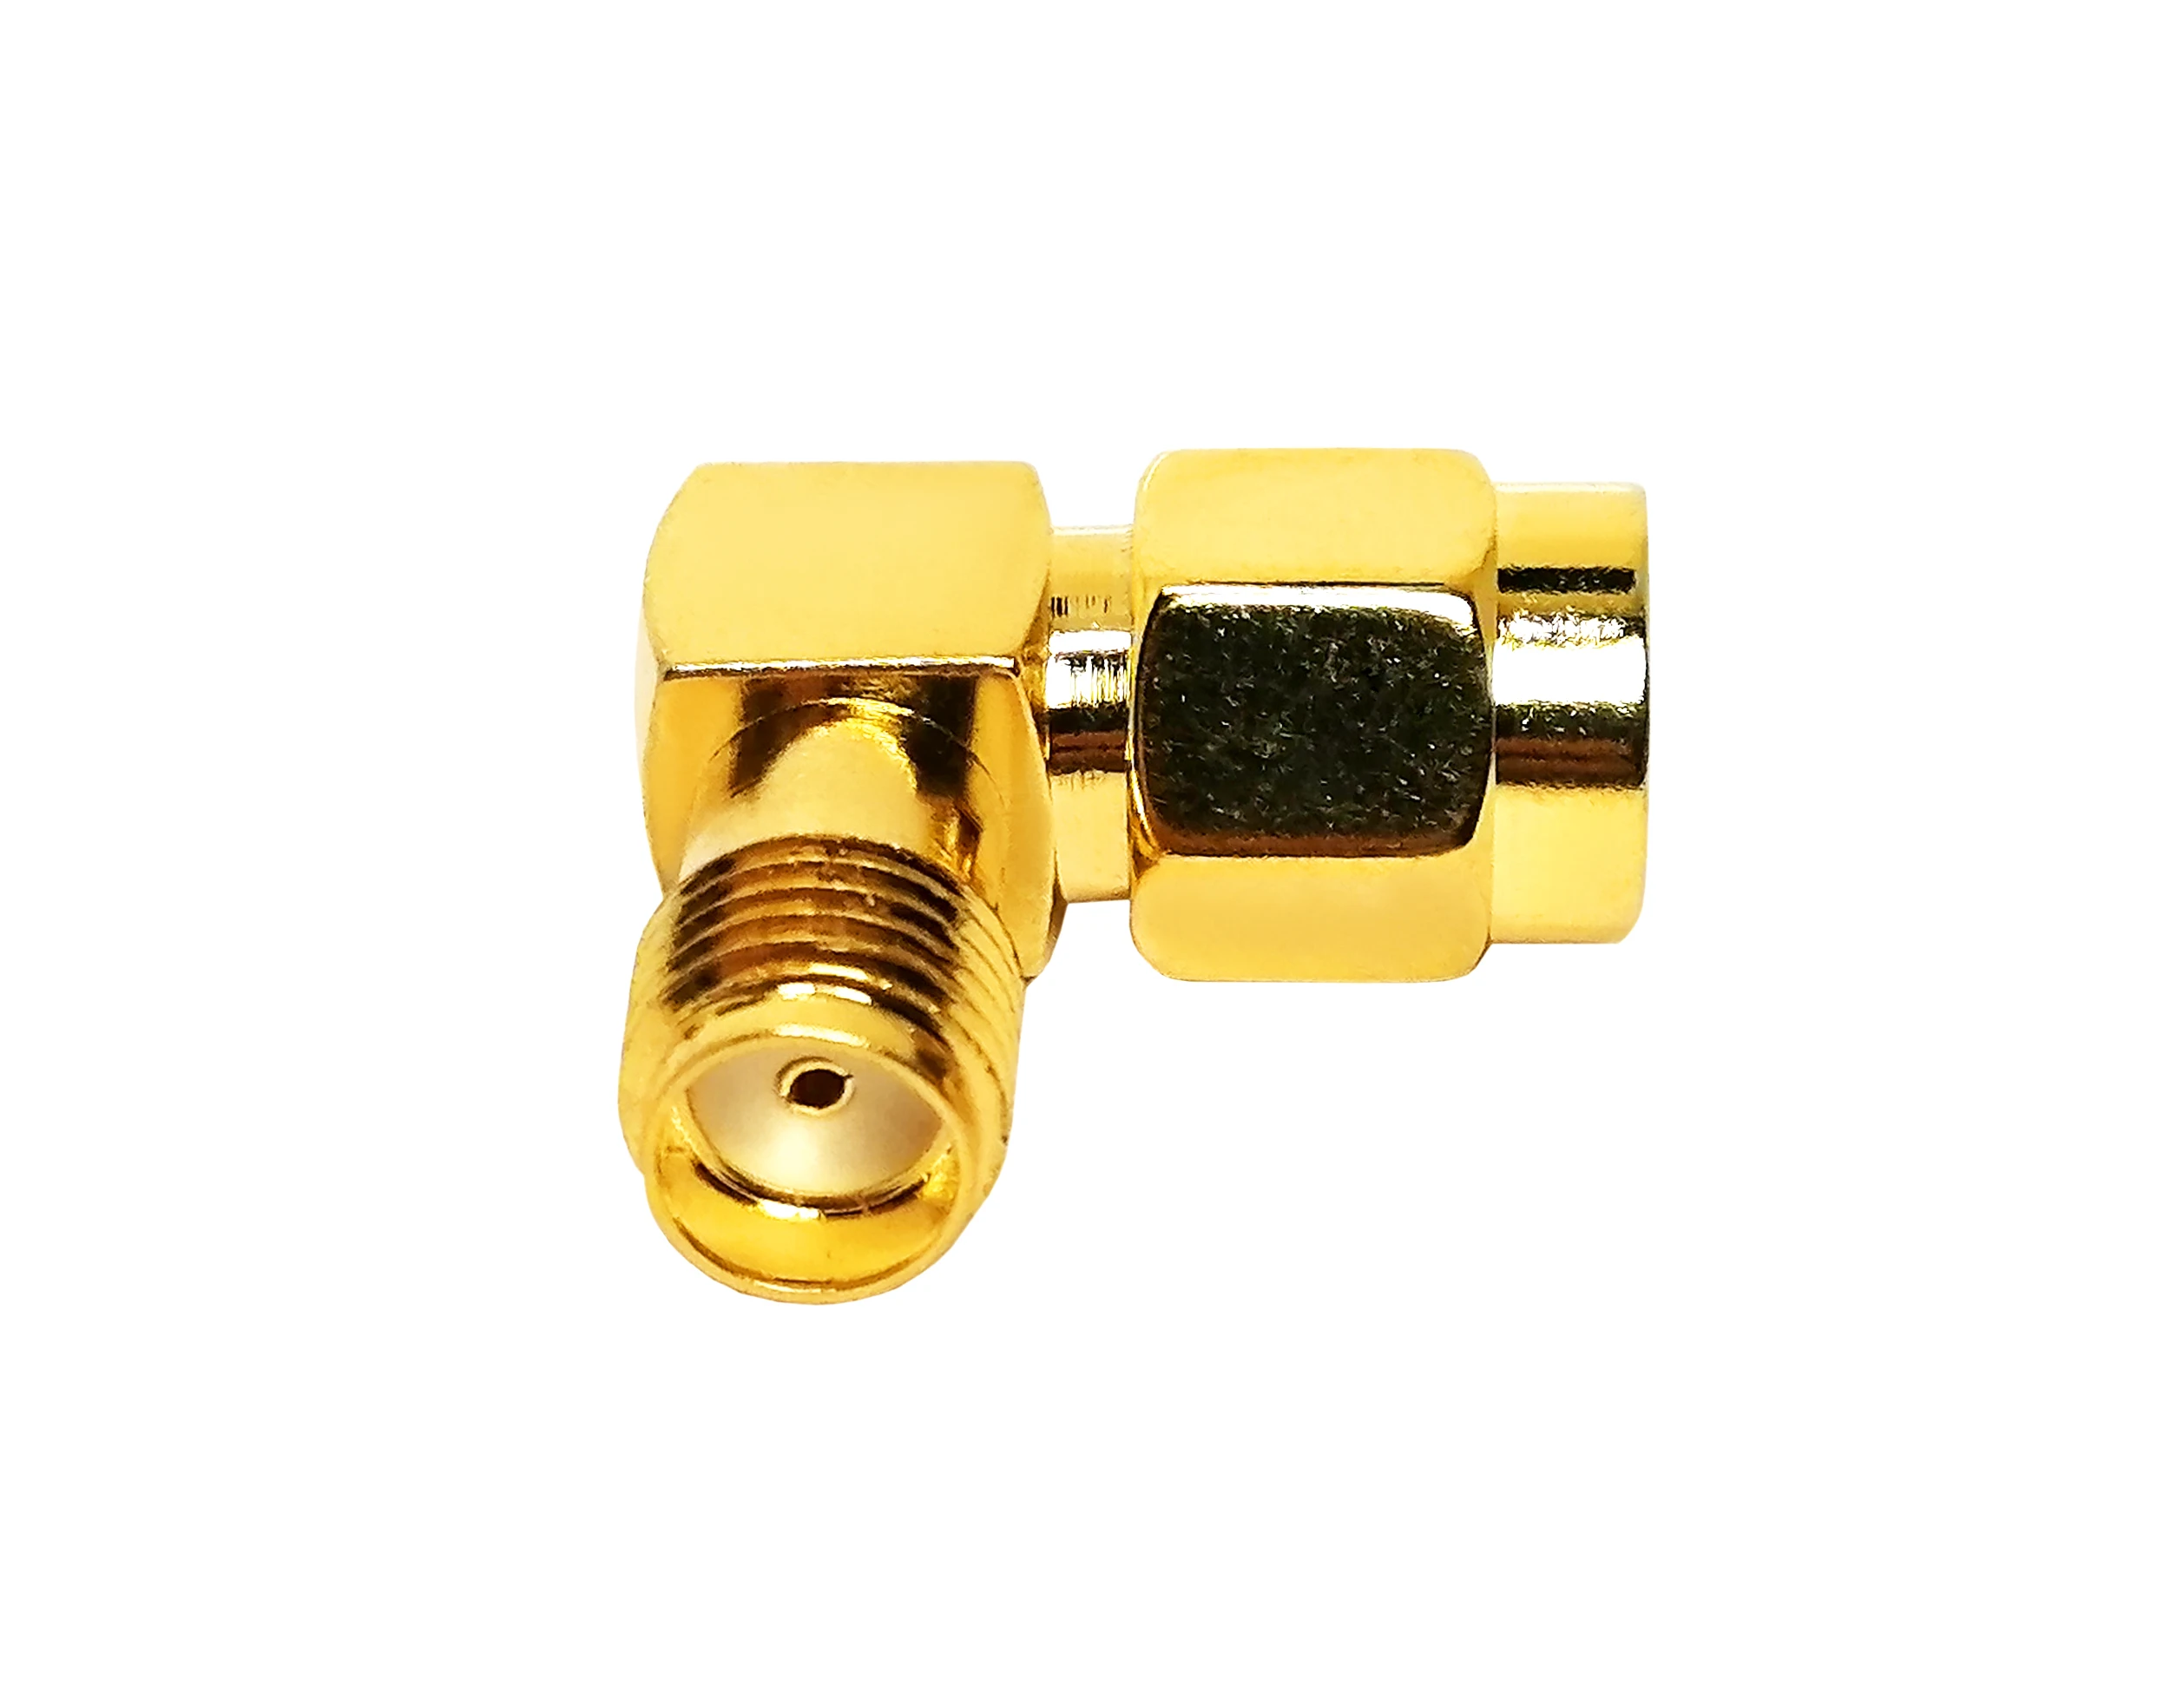 Adapter Gold plated sma female to sma male 90 degree elbow right angle  rf coaxial adaptor factory